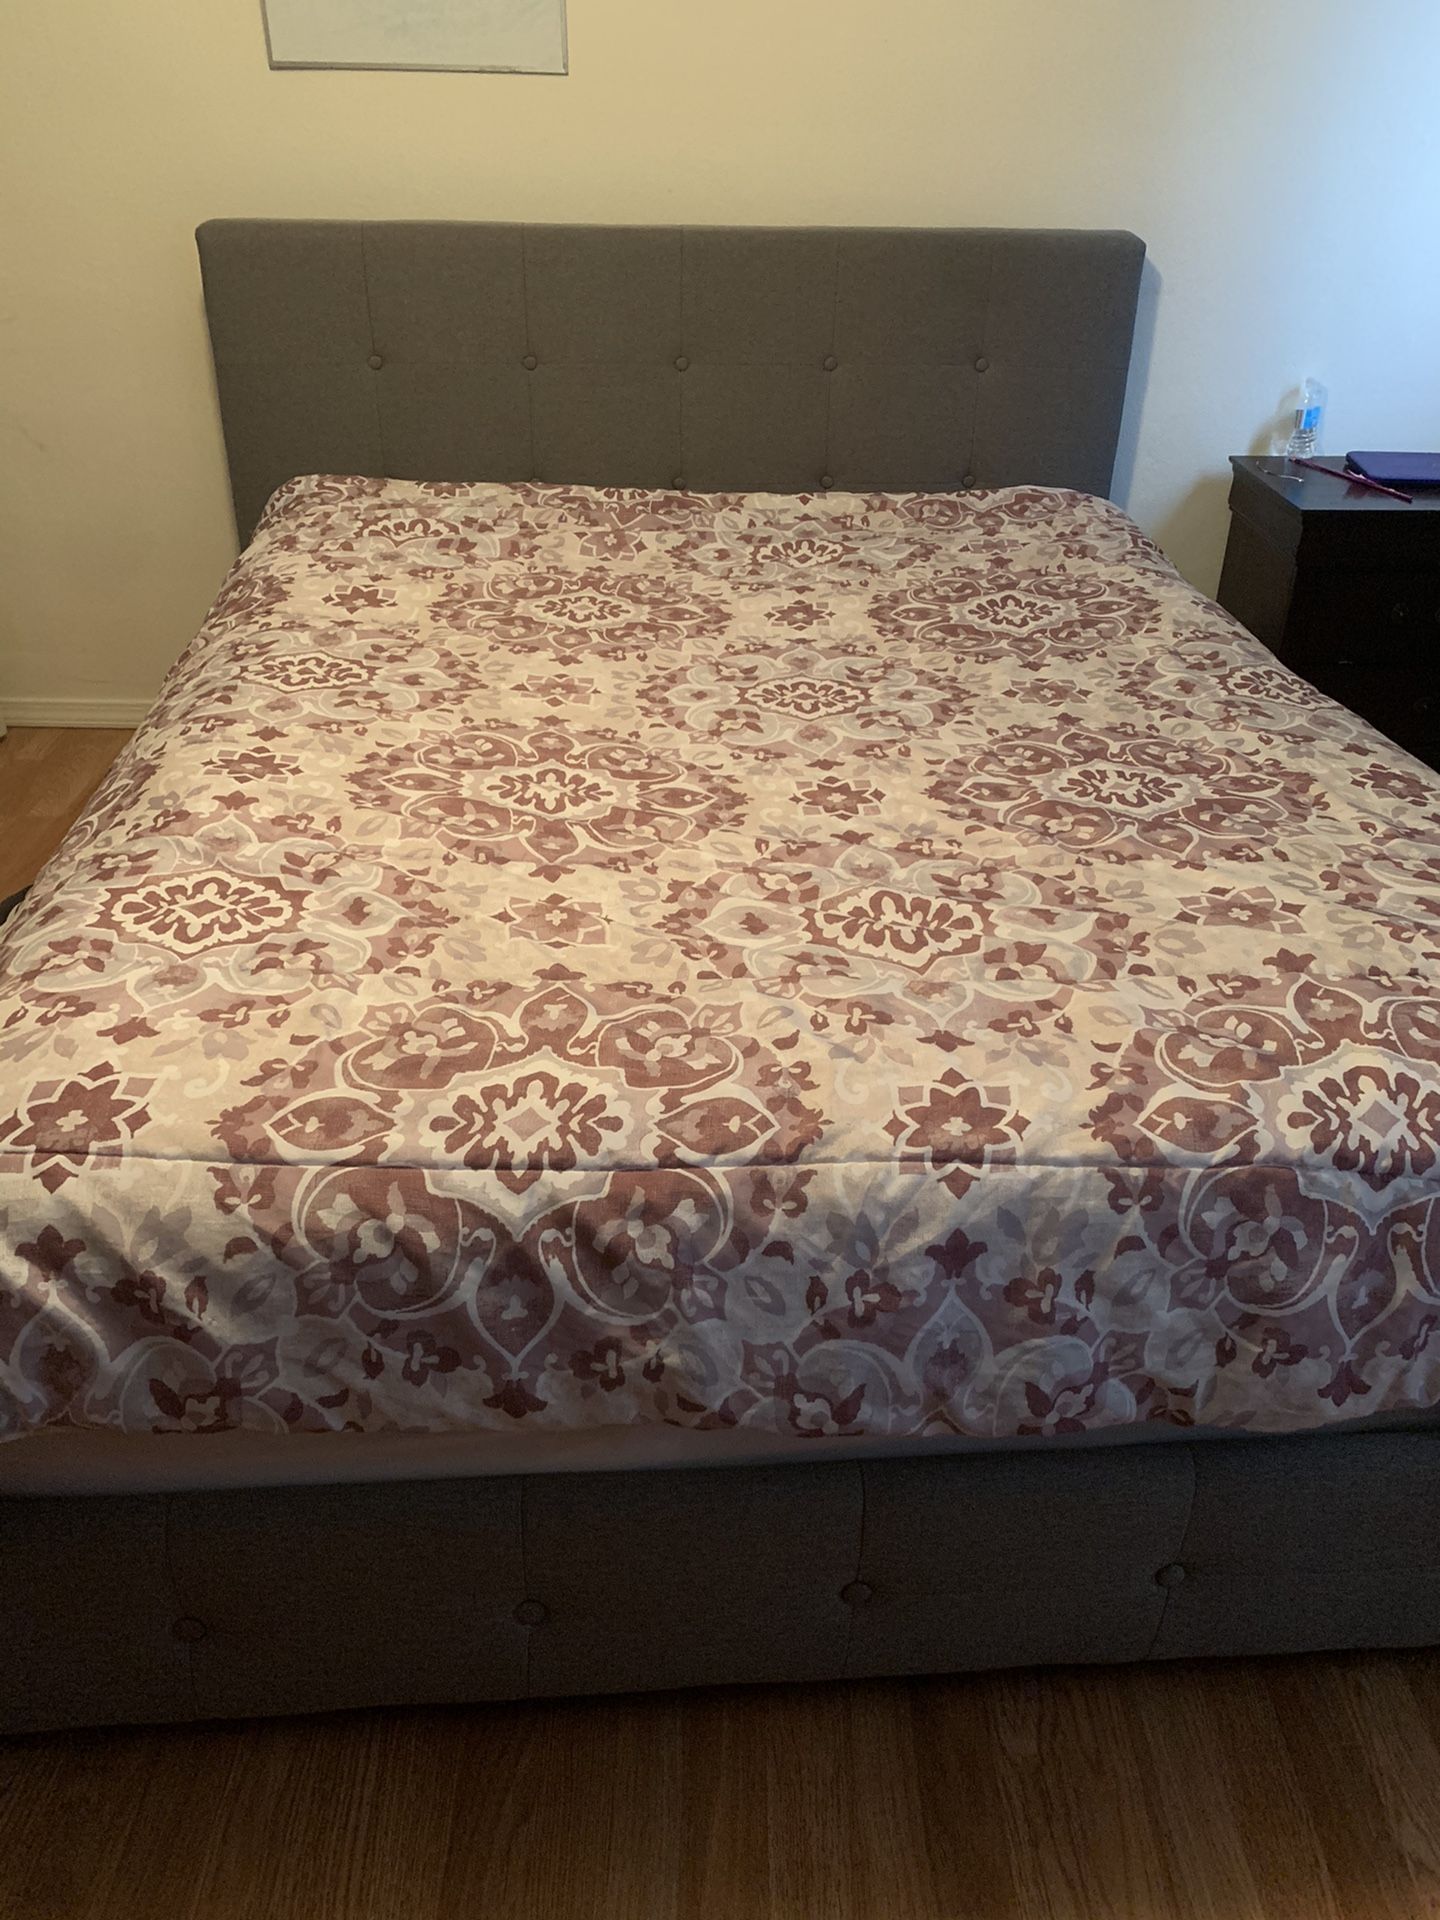 Platform Bed frame. Mattress not included. Great condition, no spots, marks, or Tears. Not even a year old